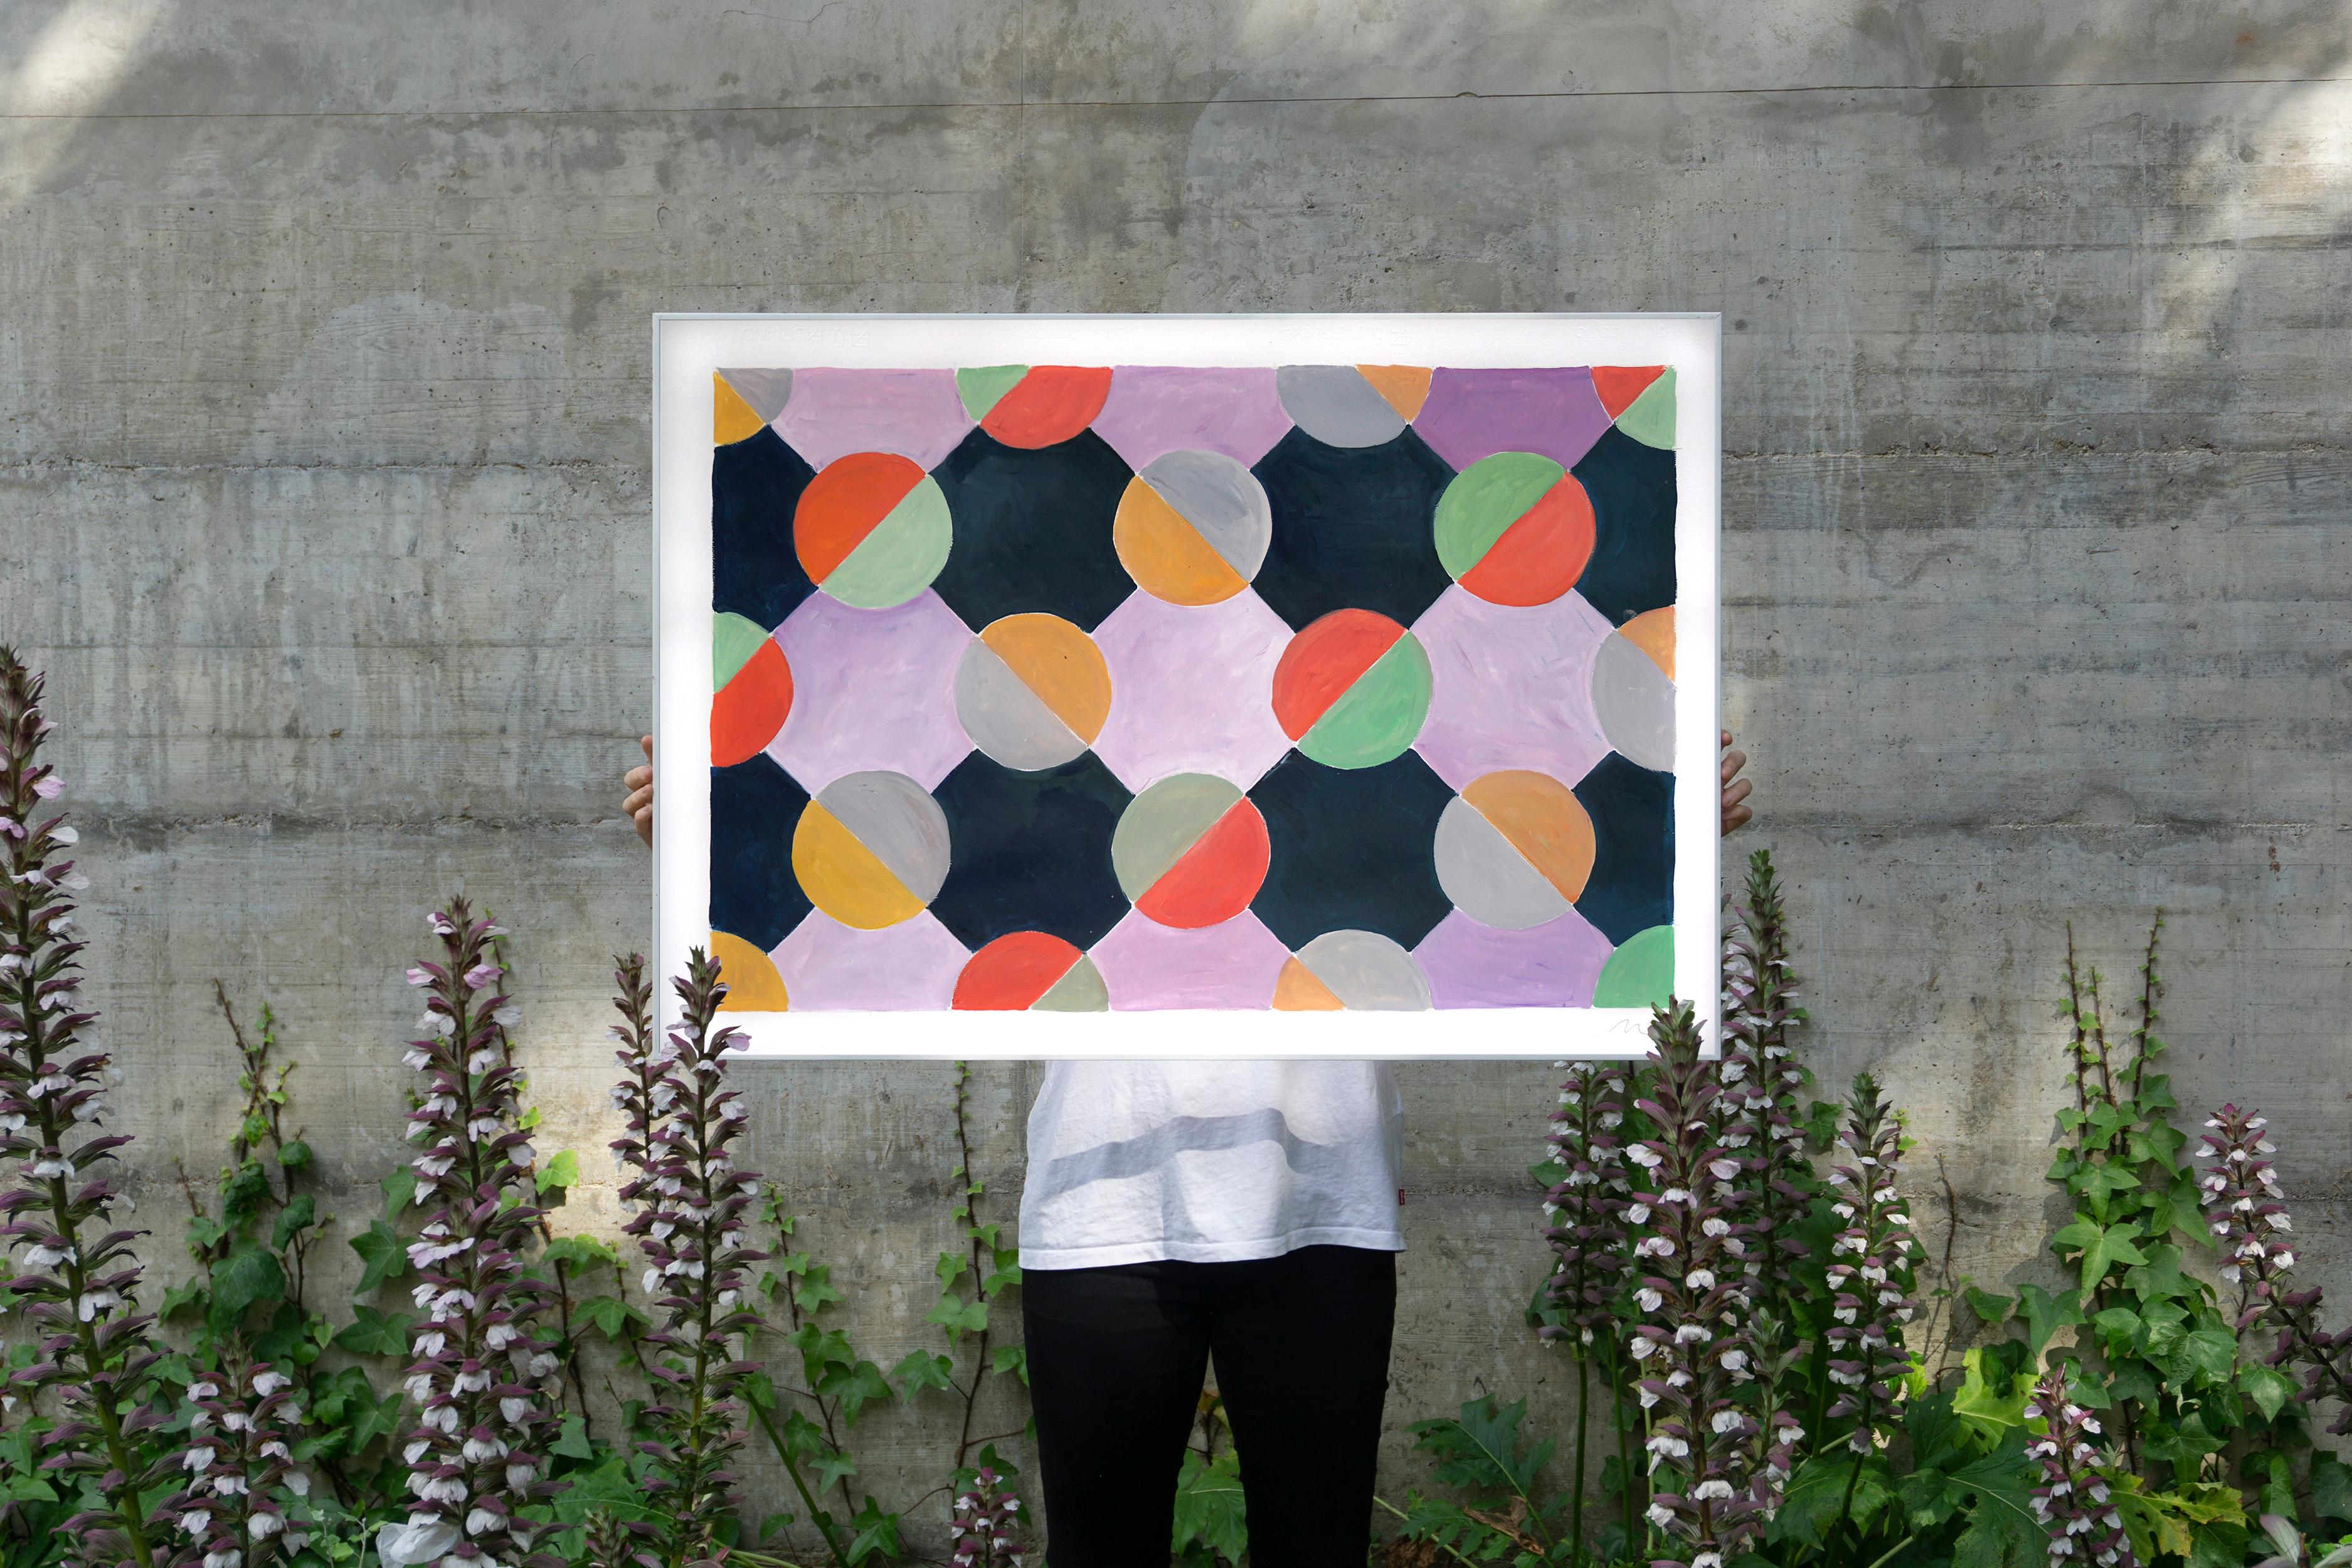 New Chess Tiles, Purple and Coral Squares on Black, Primary Geometry, Abstract  - Painting by Natalia Roman